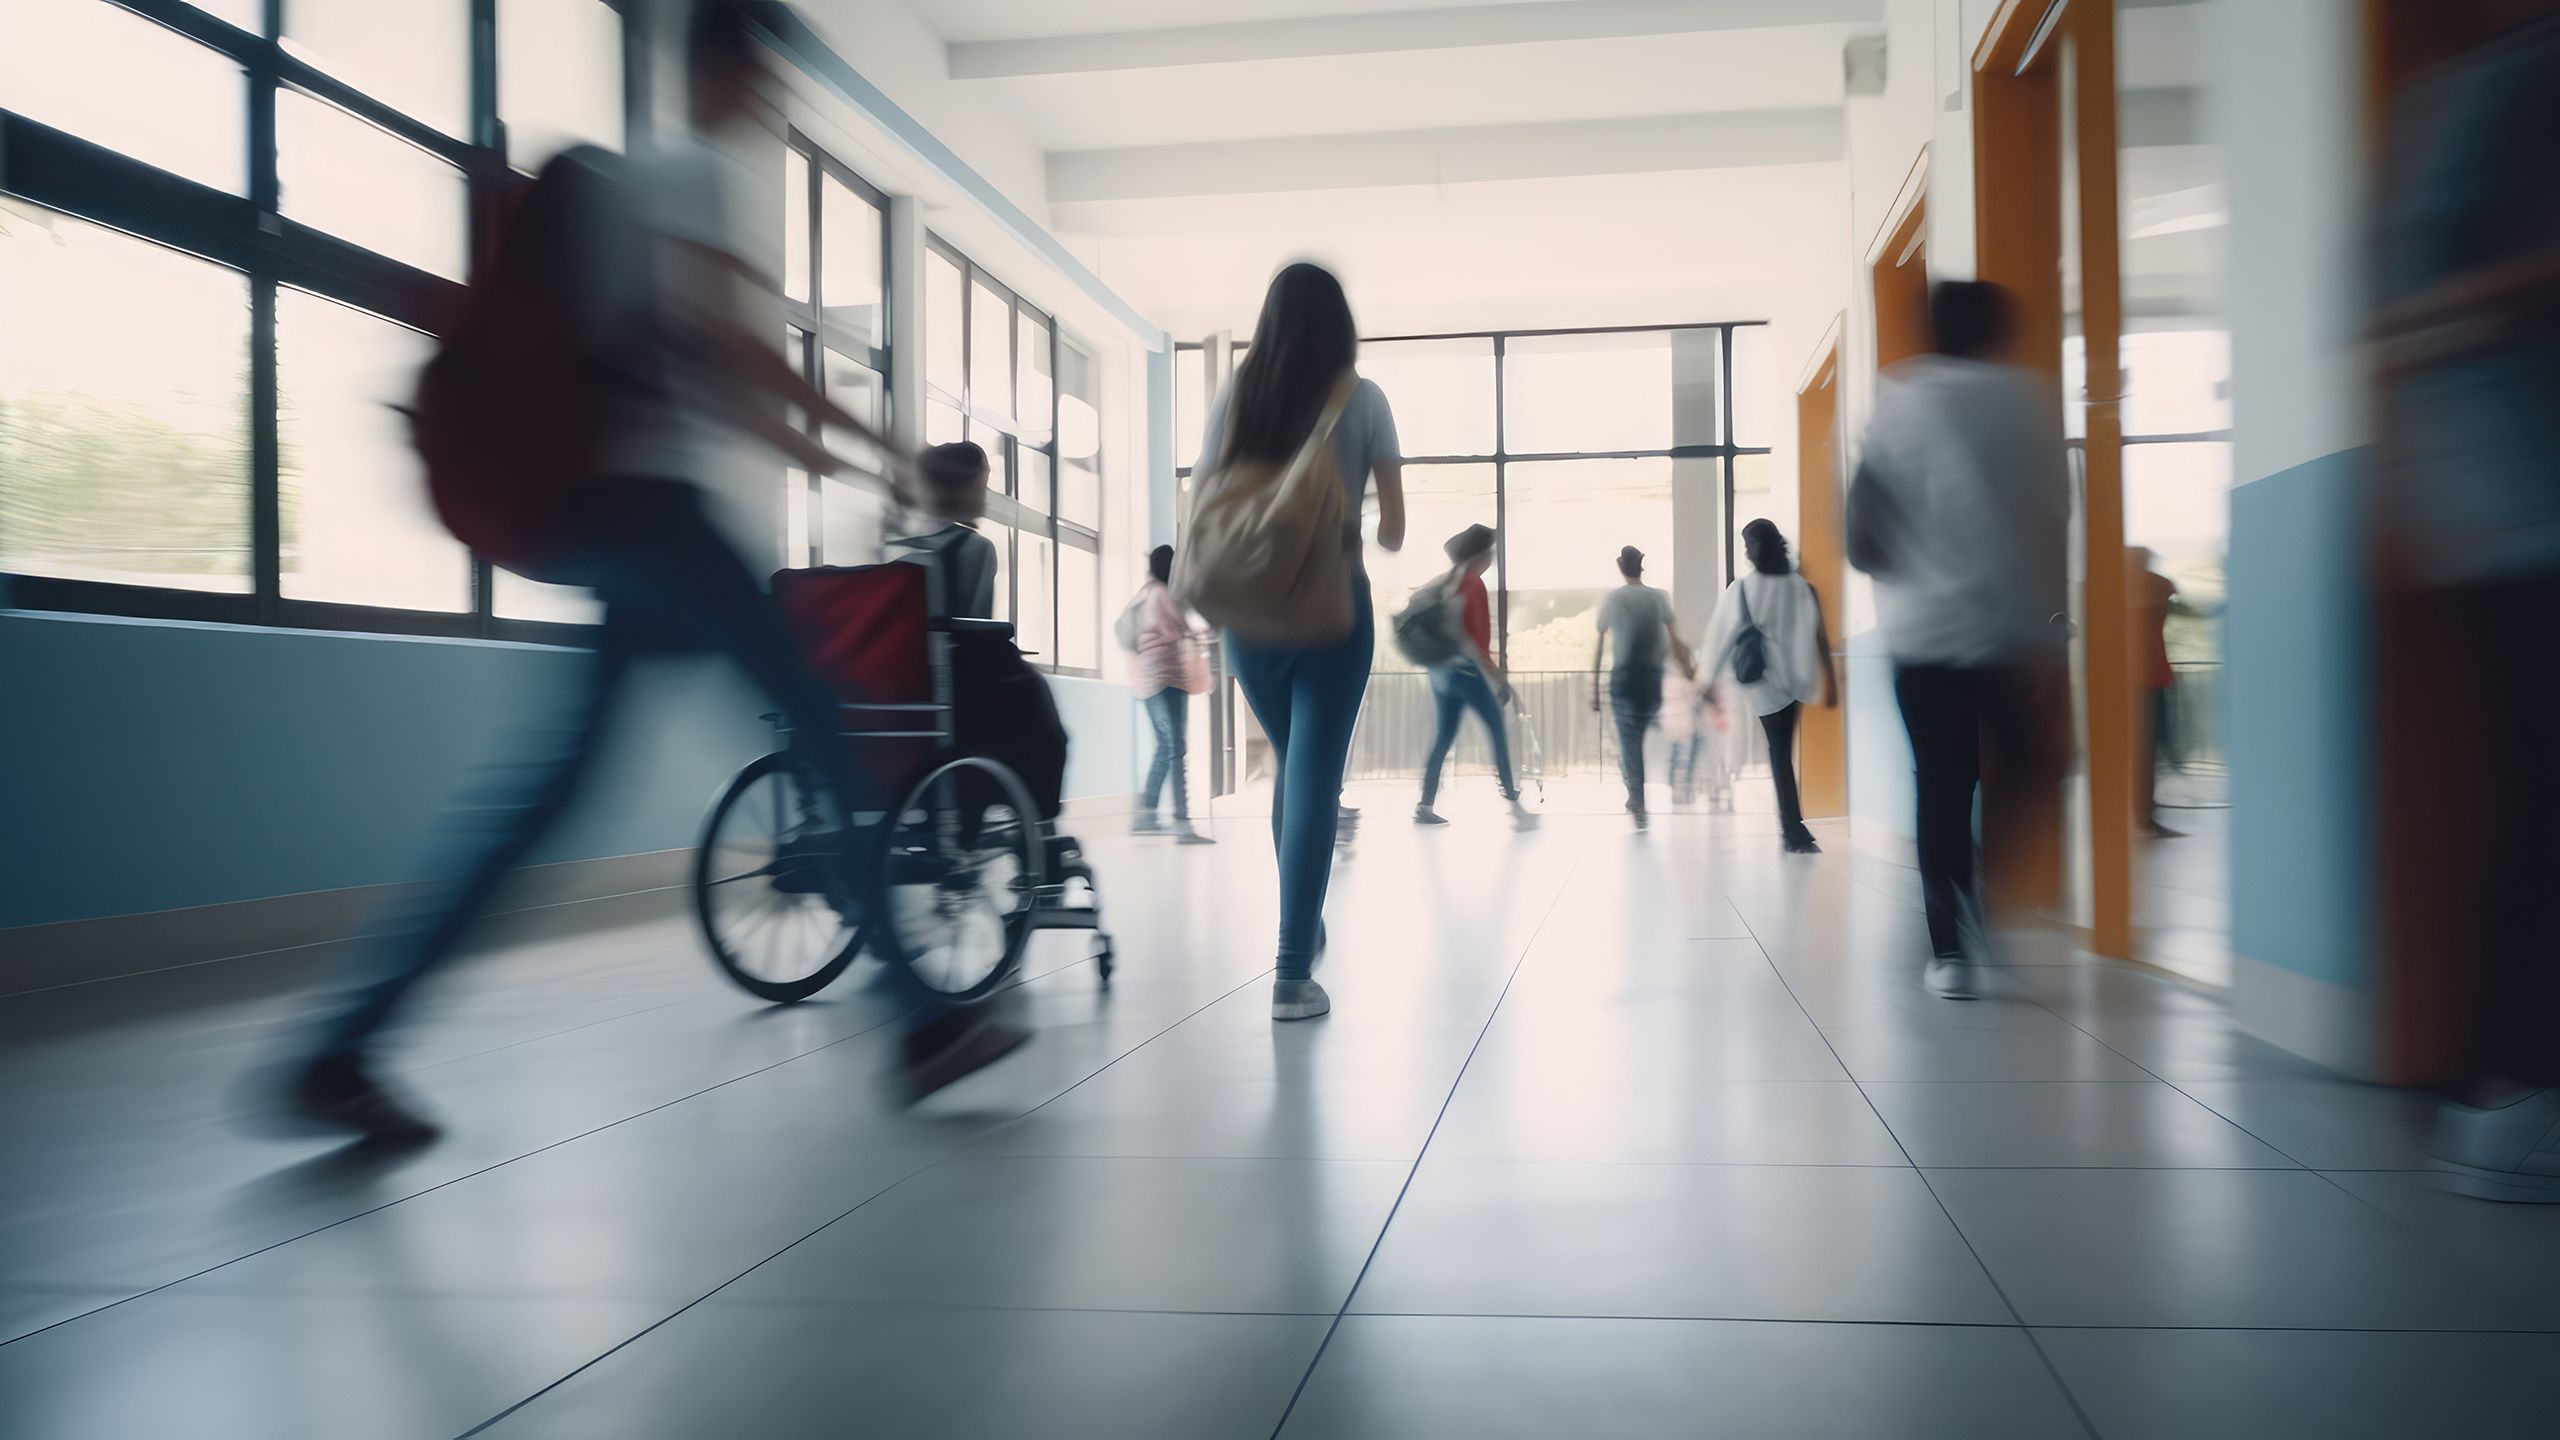 School corridor in which students are walking and one is in a wheelchair